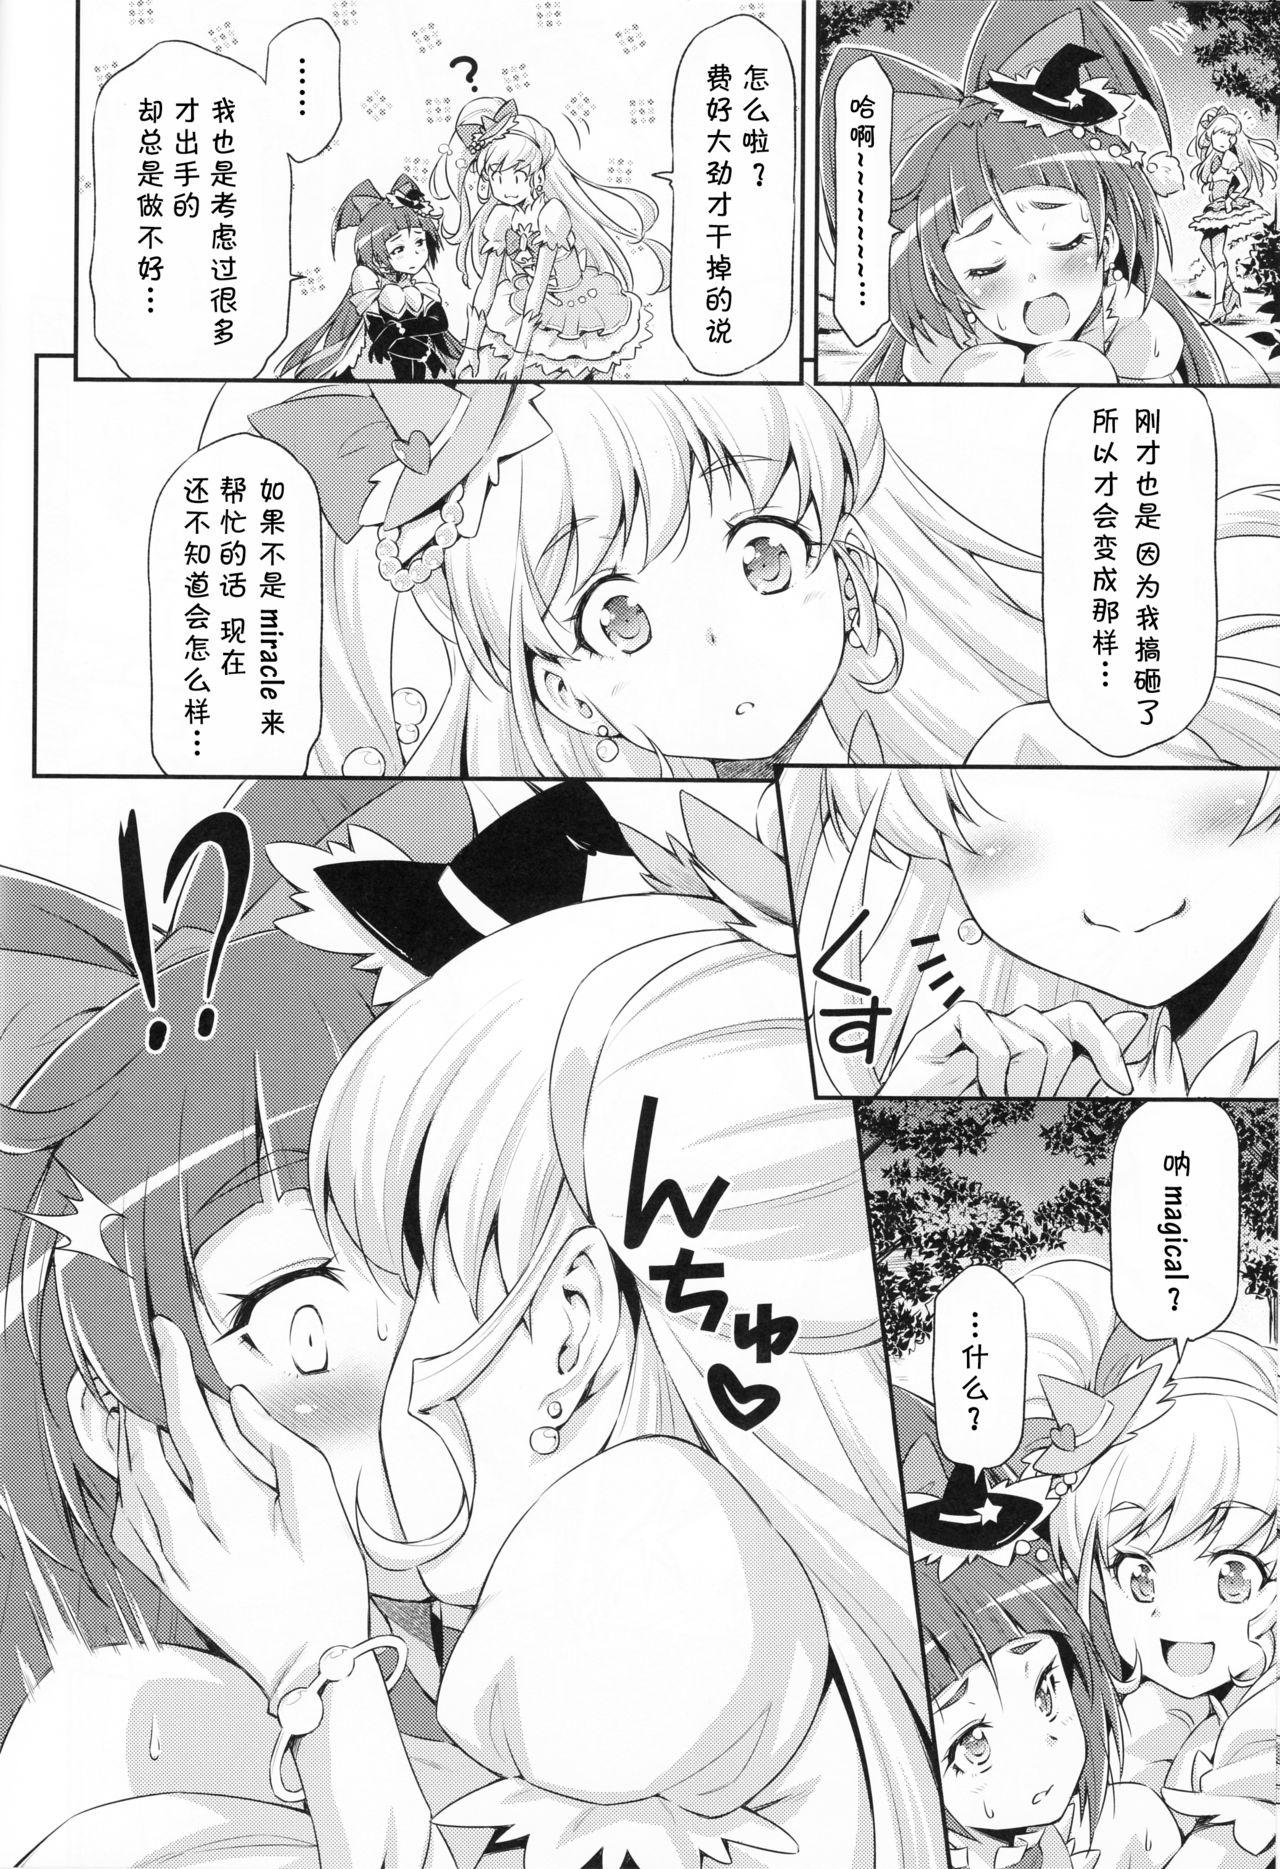 Bra Miracle Sweet Magical Fragrance - Maho girls precure Shemales - Page 10